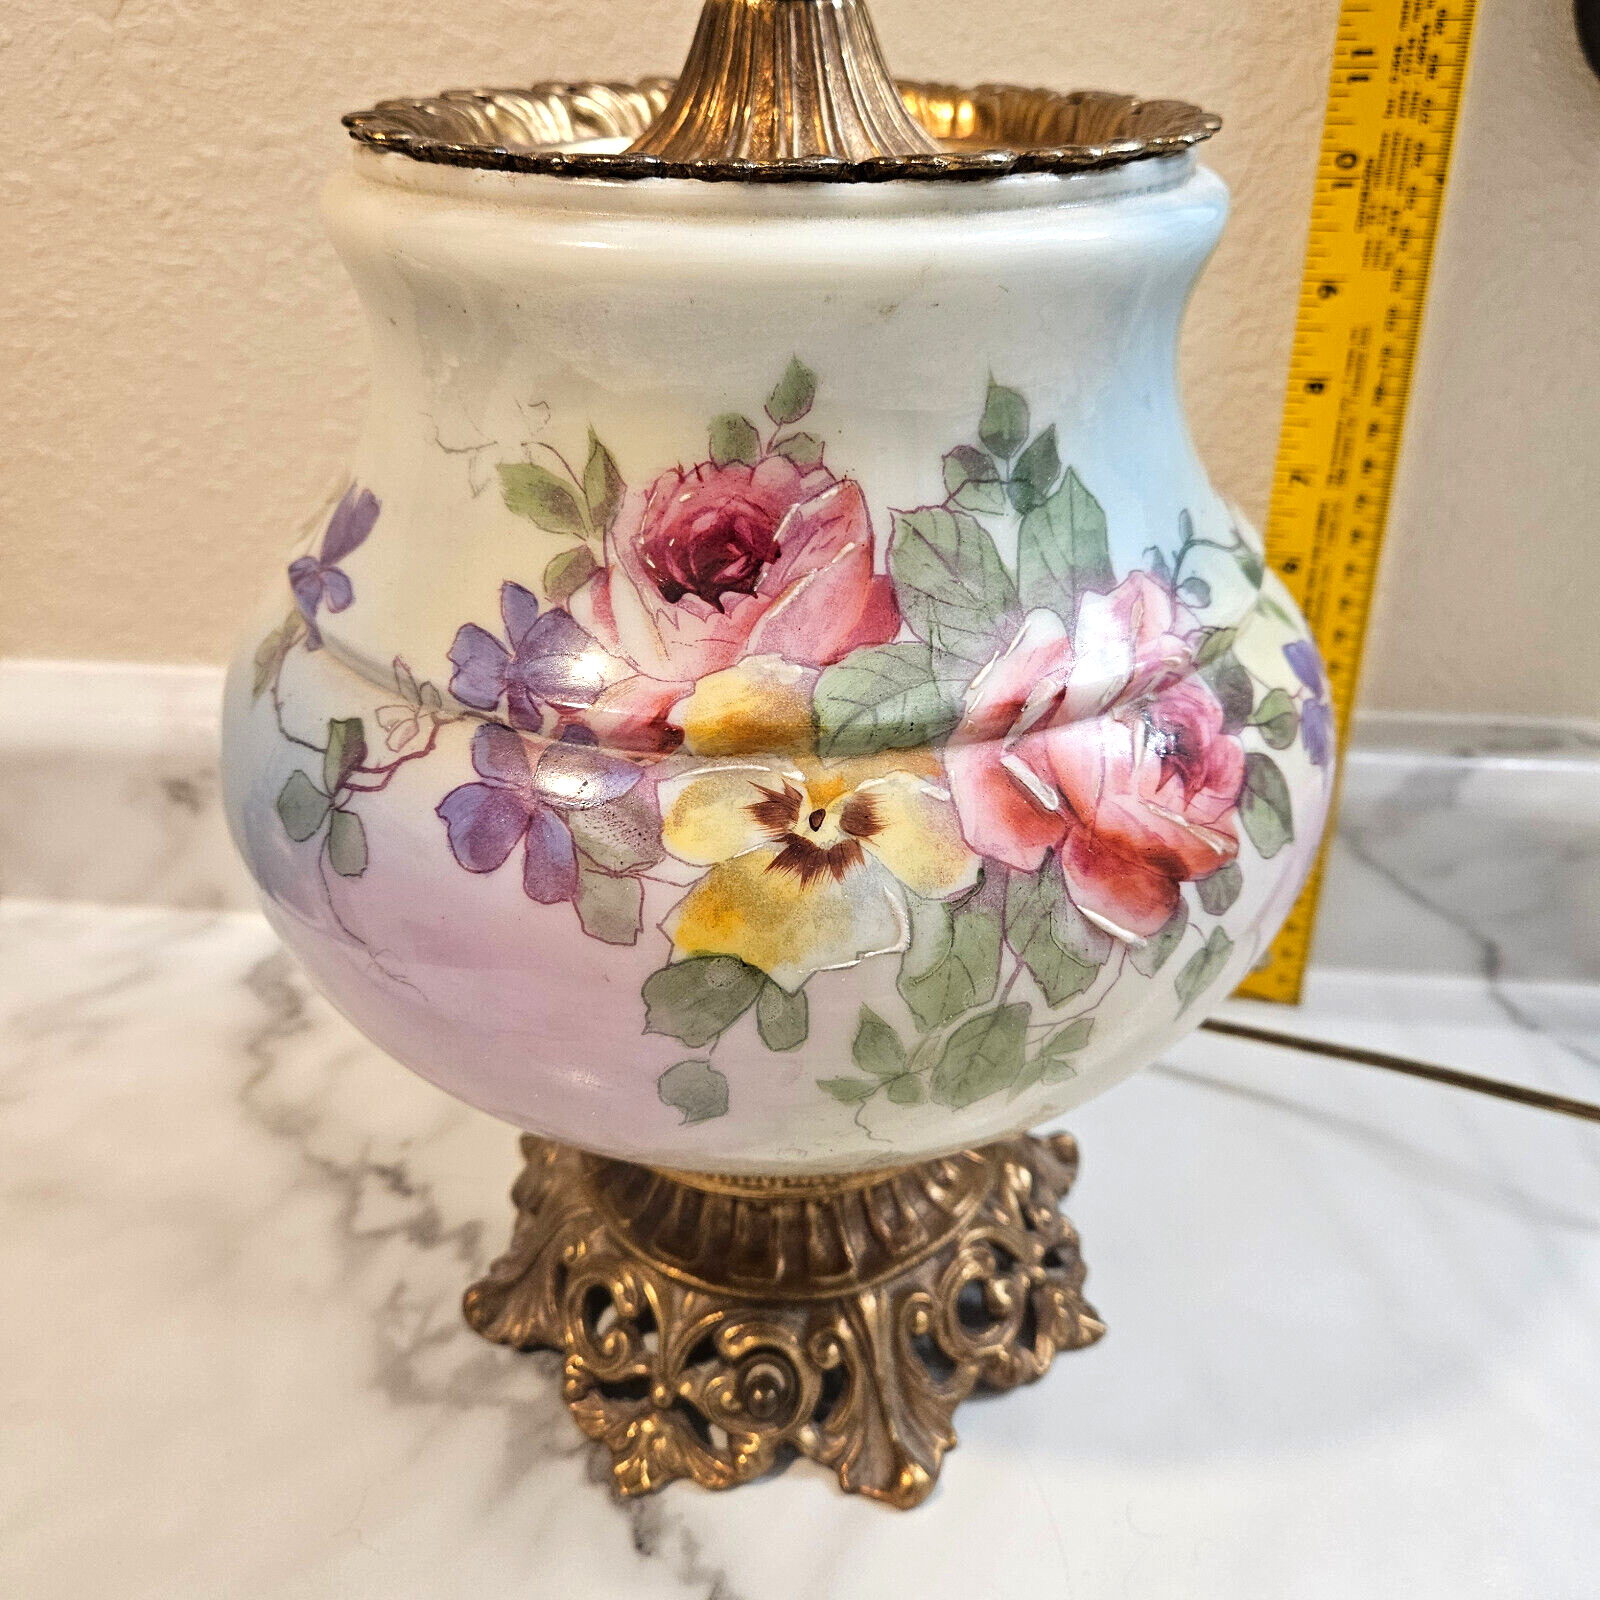 Vintage Hurricane Lamp Electric Floral Design Hand Painted